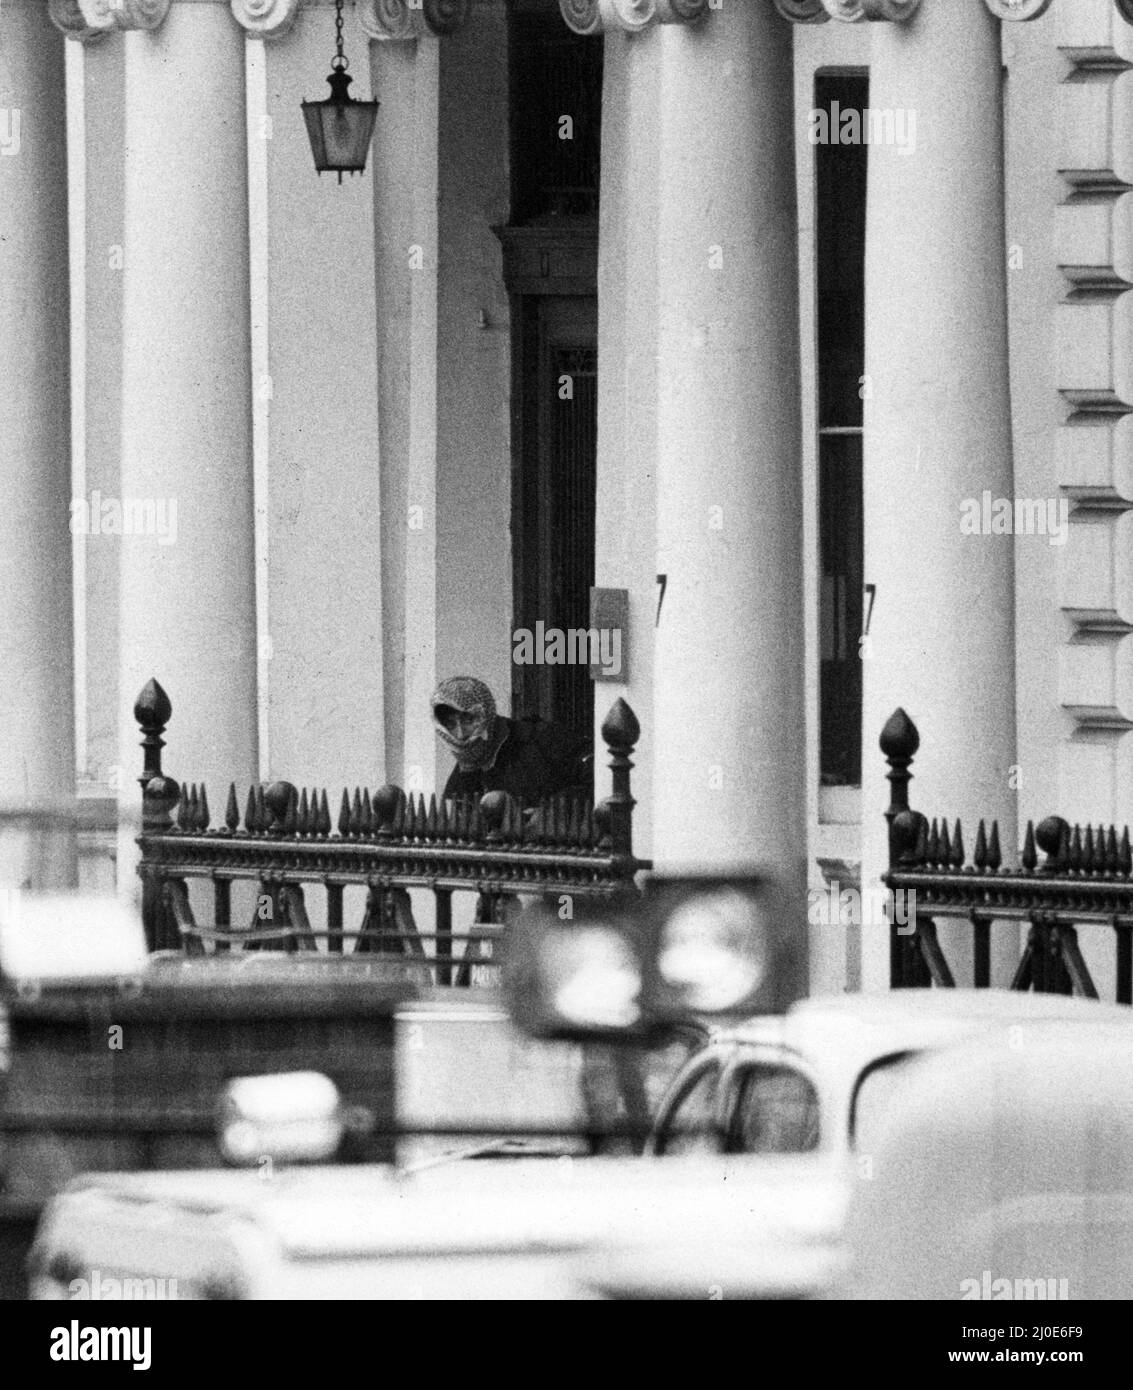 Third day of the Iranian Embassy Siege in London where six gunmen of the Iranian extremist group 'Democratic Revolutionary Movement for the Liberation of Arabistan' stormed the building, taking 26 hostages before the SAS retook the embassy and freed the hostages. Pistol in hand, one of the hood Arab terrorists steps out from the Embassy, lured out by lunch boxes of food placed on the doorstep by police for the gunmen and their hostages. 2nd May 1980. Stock Photo